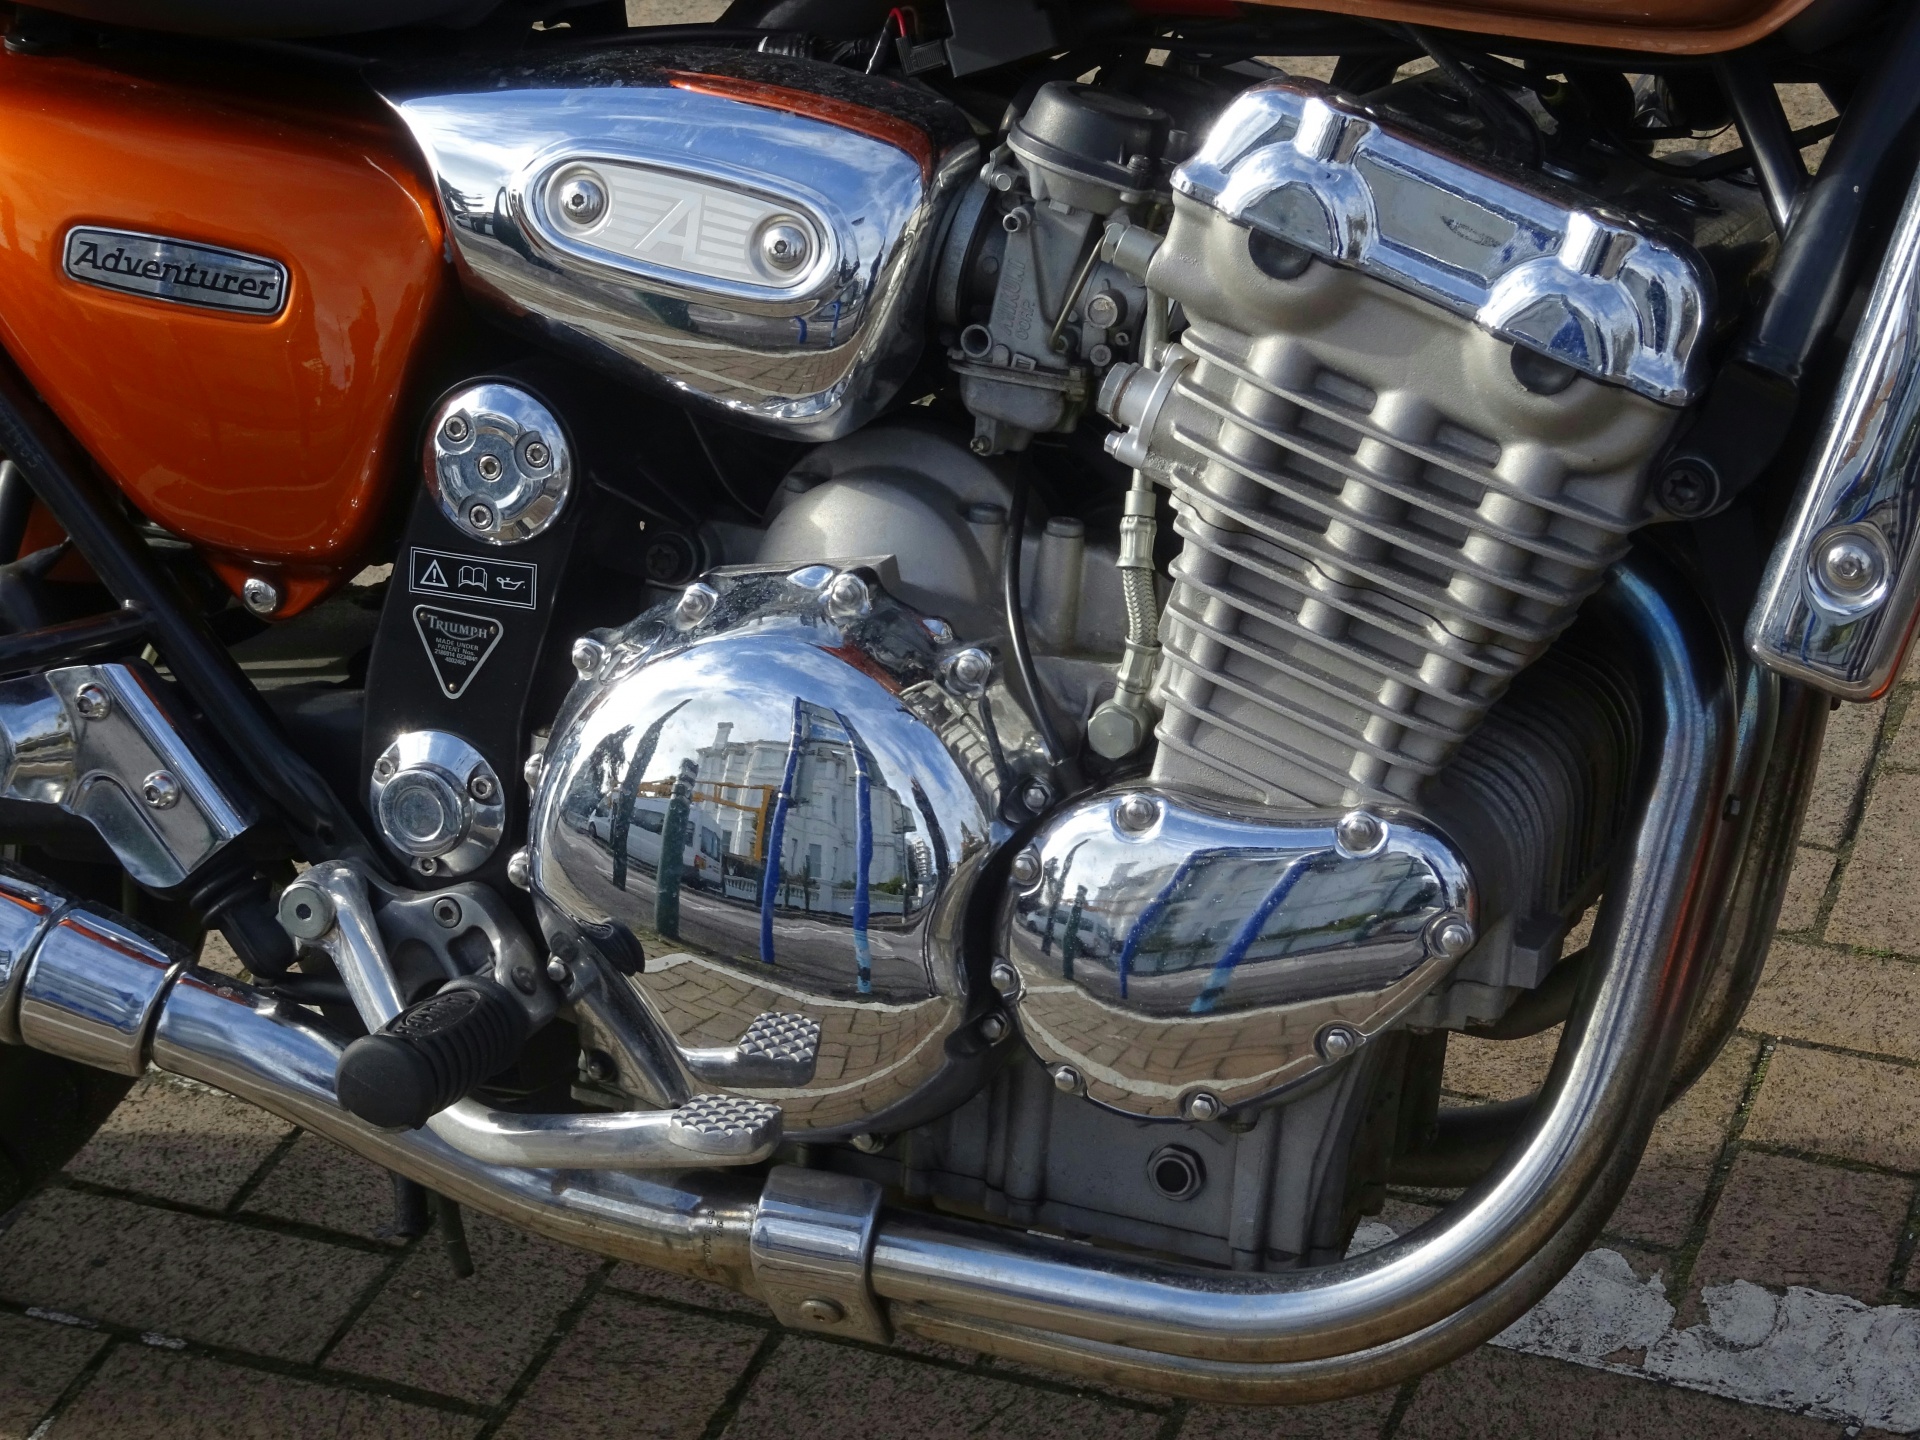 Triumph Motorcycle Engines